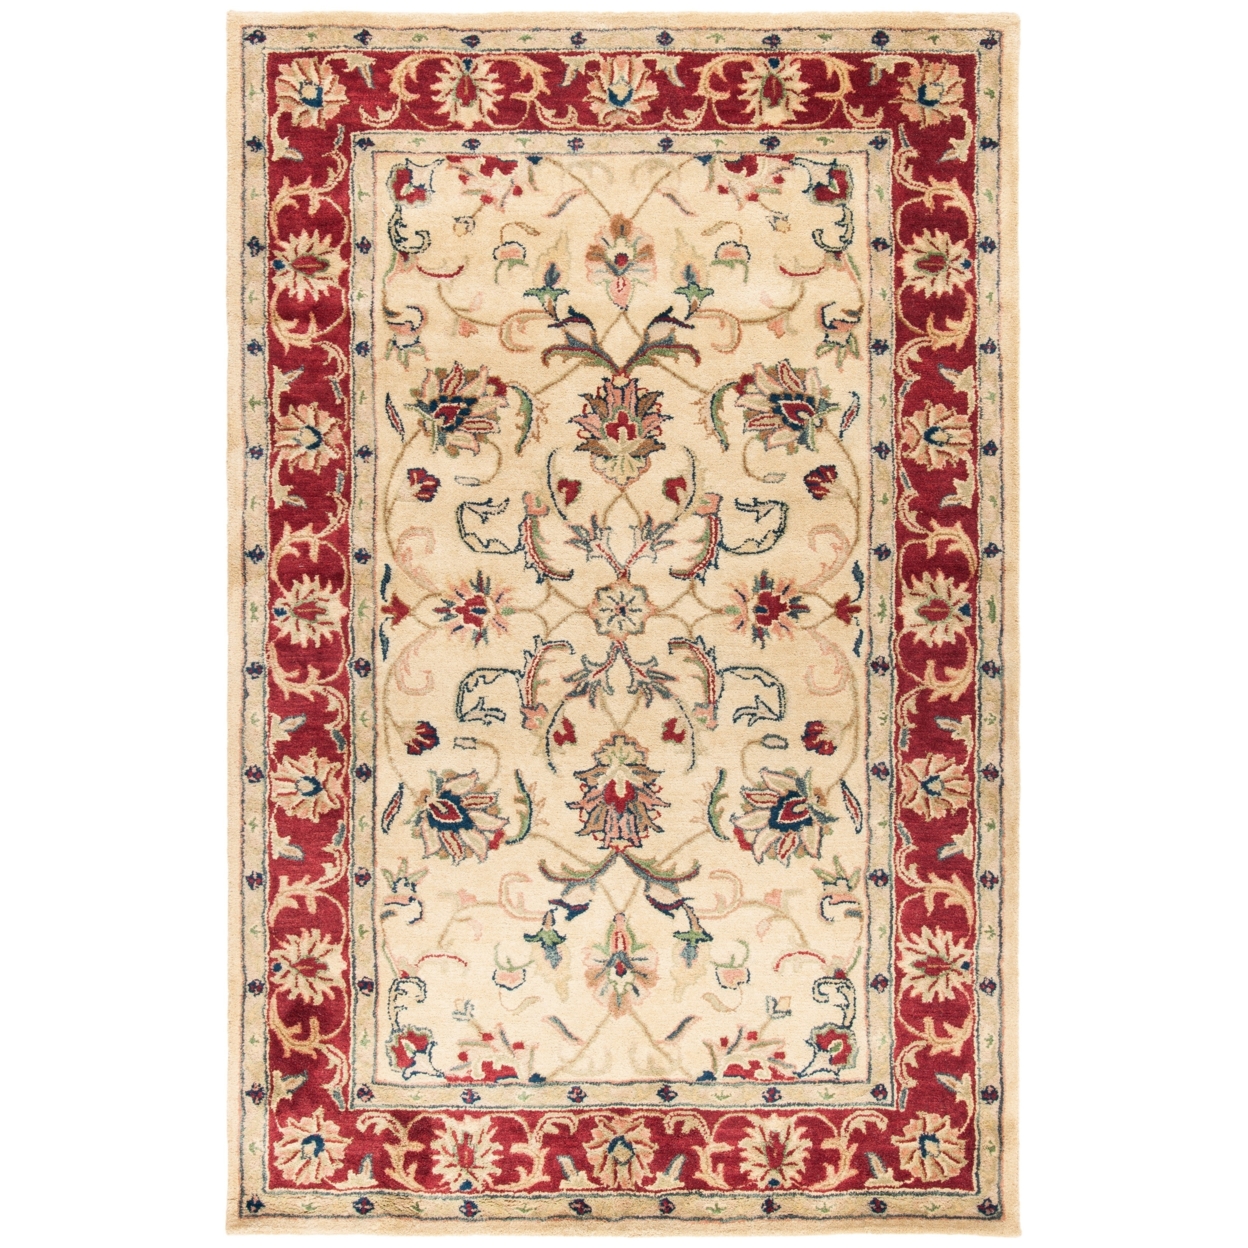 SAFAVIEH CL398A Classic Gold / Red - 4' 6 X 6' 6 Oval